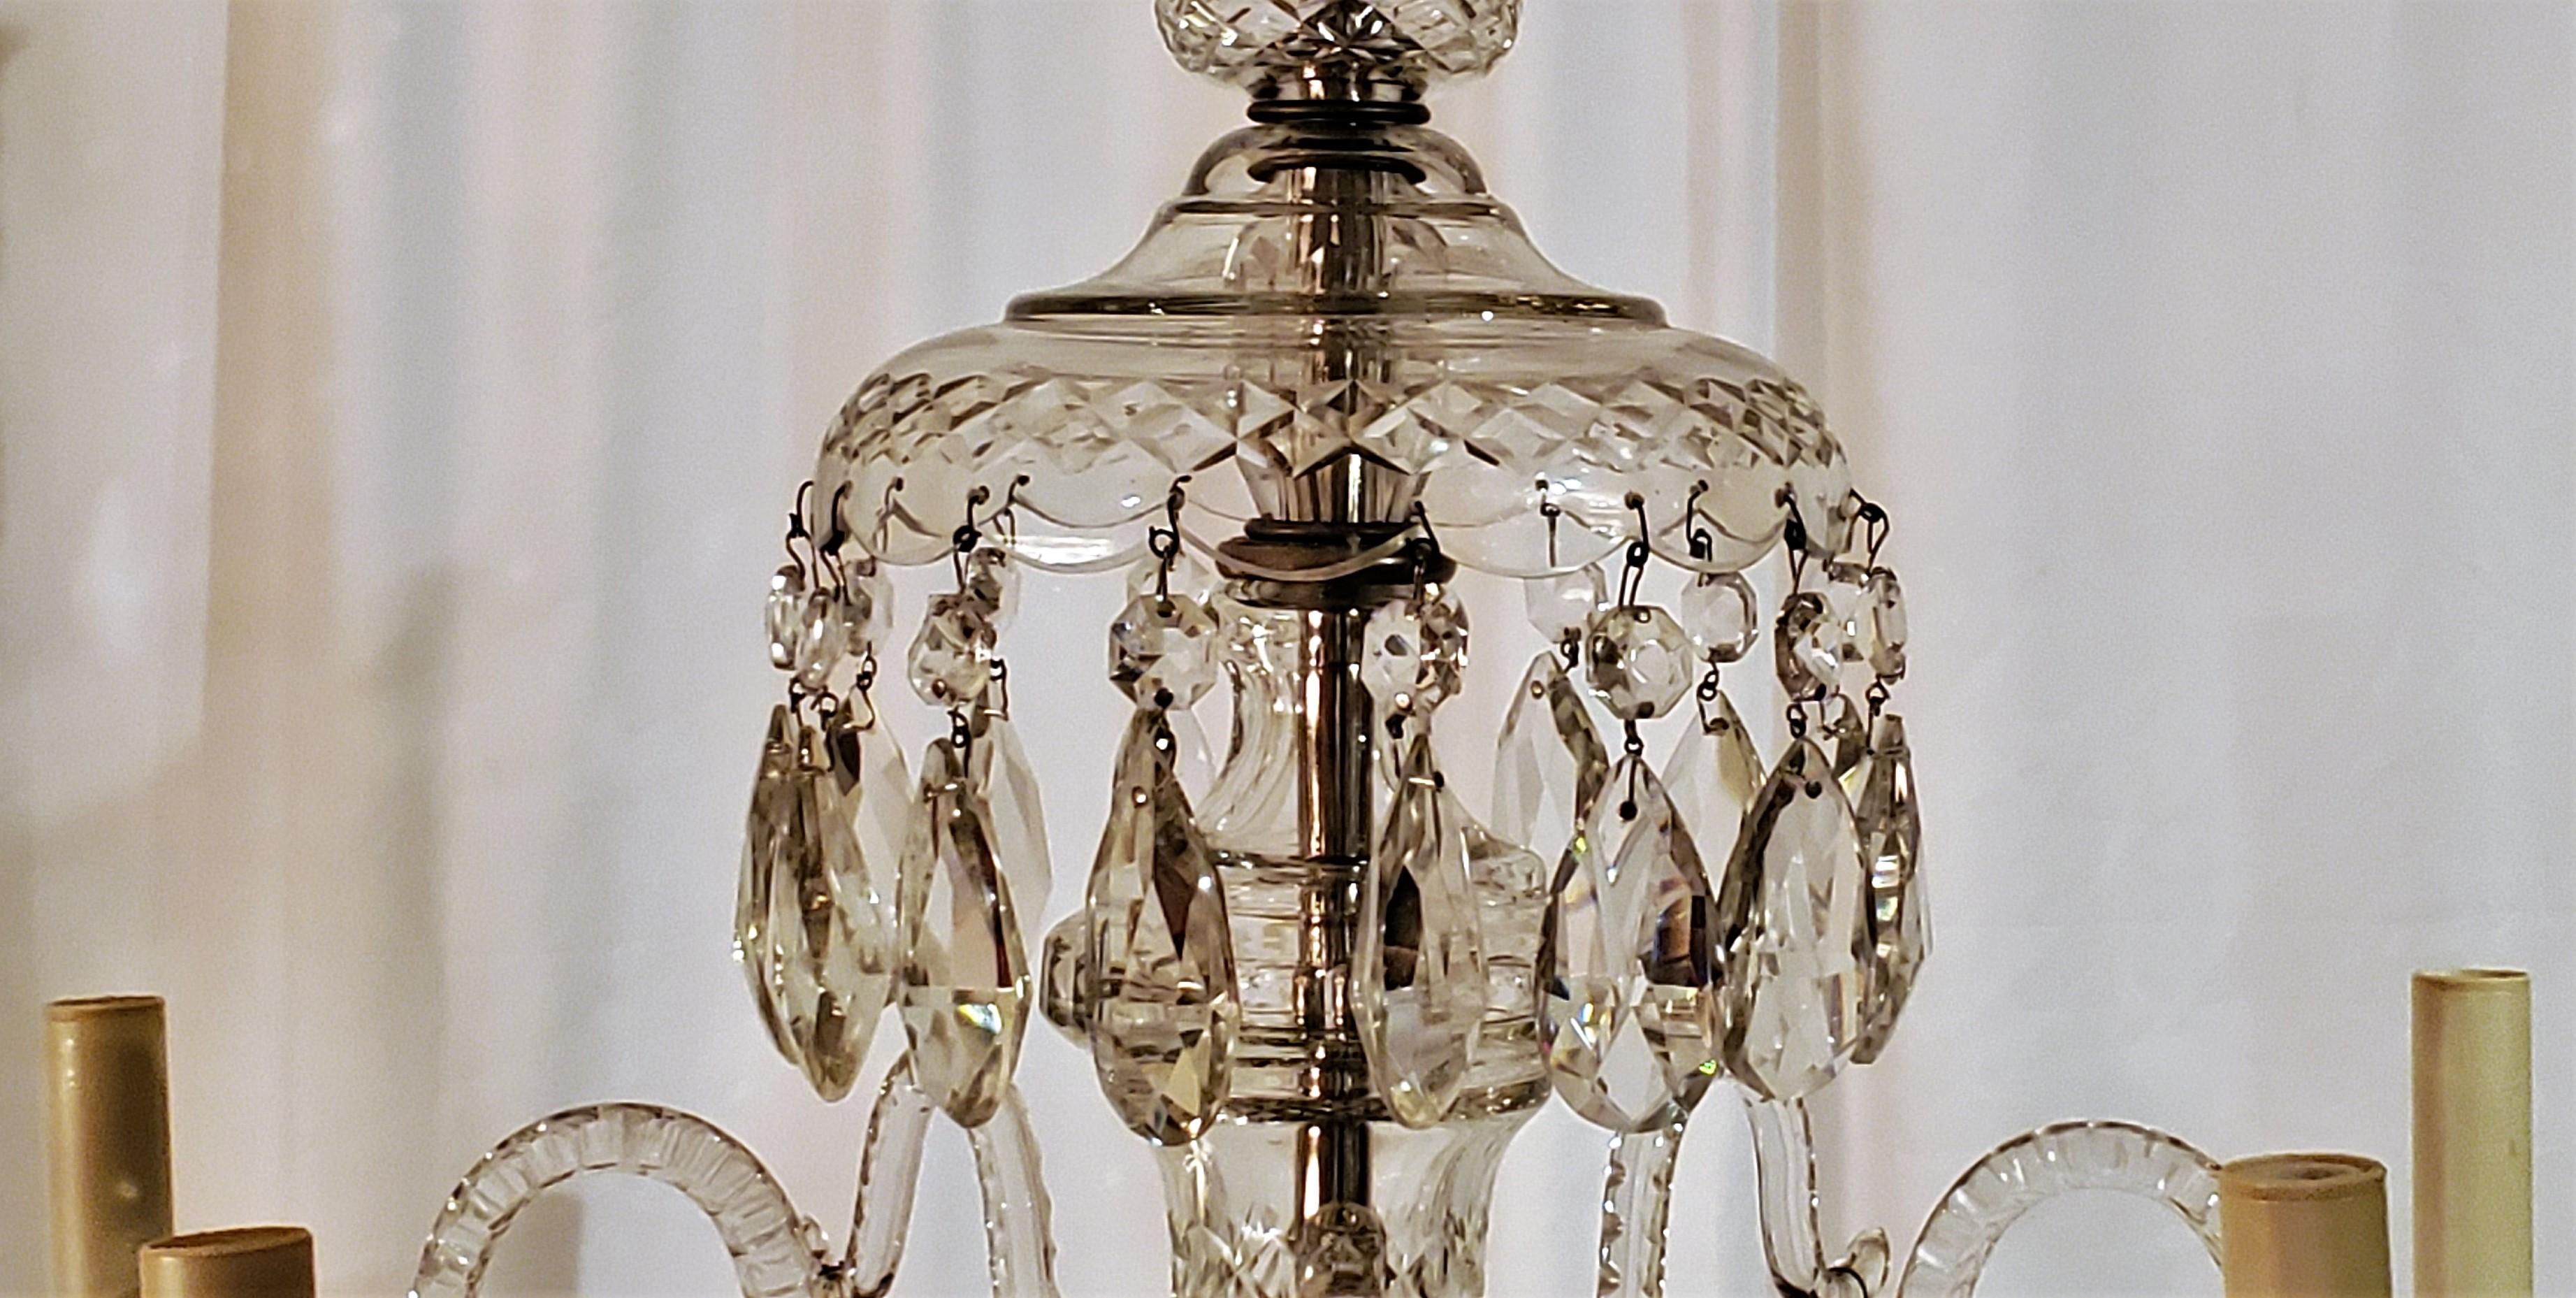 This is a very pretty little chandelier with pleasing lines.